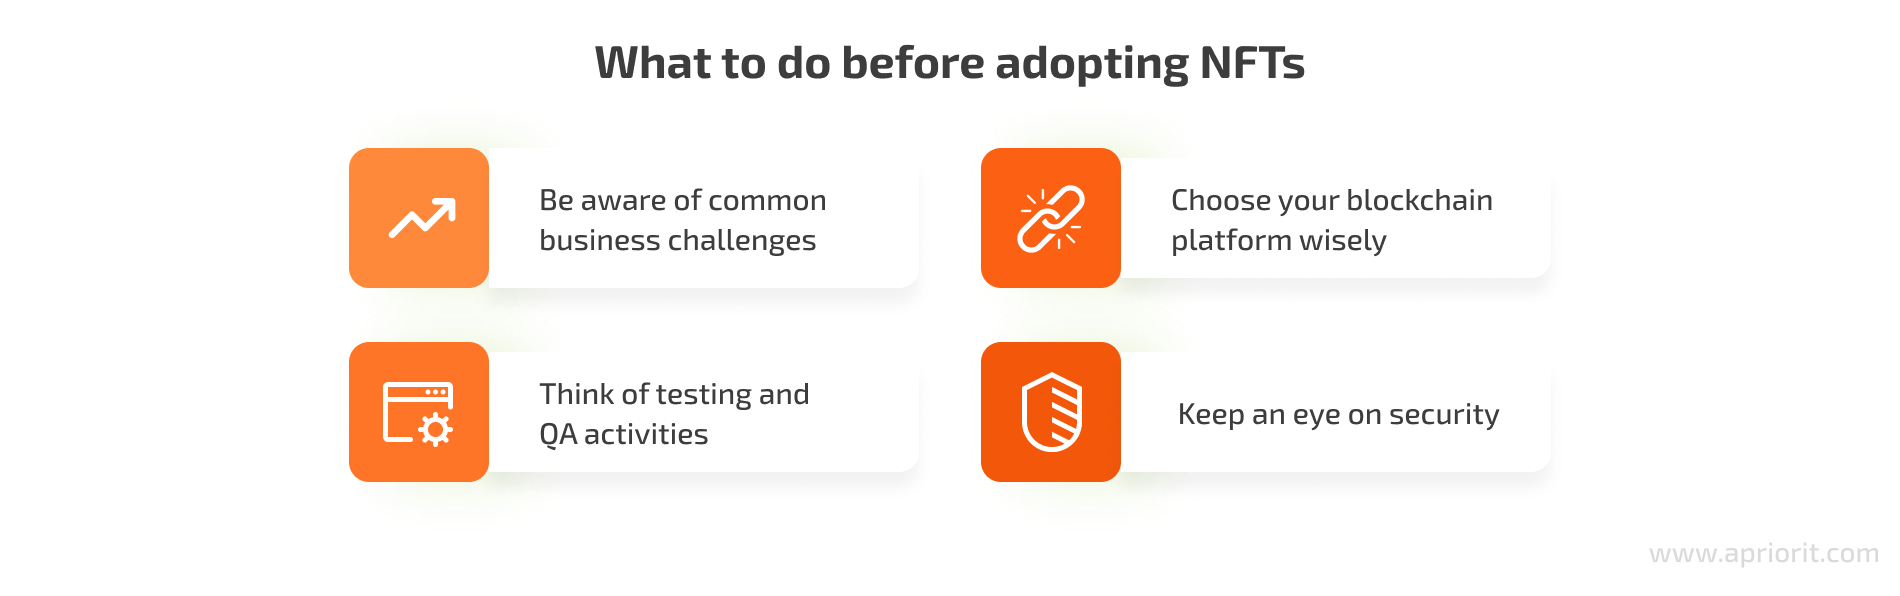 what to do before adopting nfts